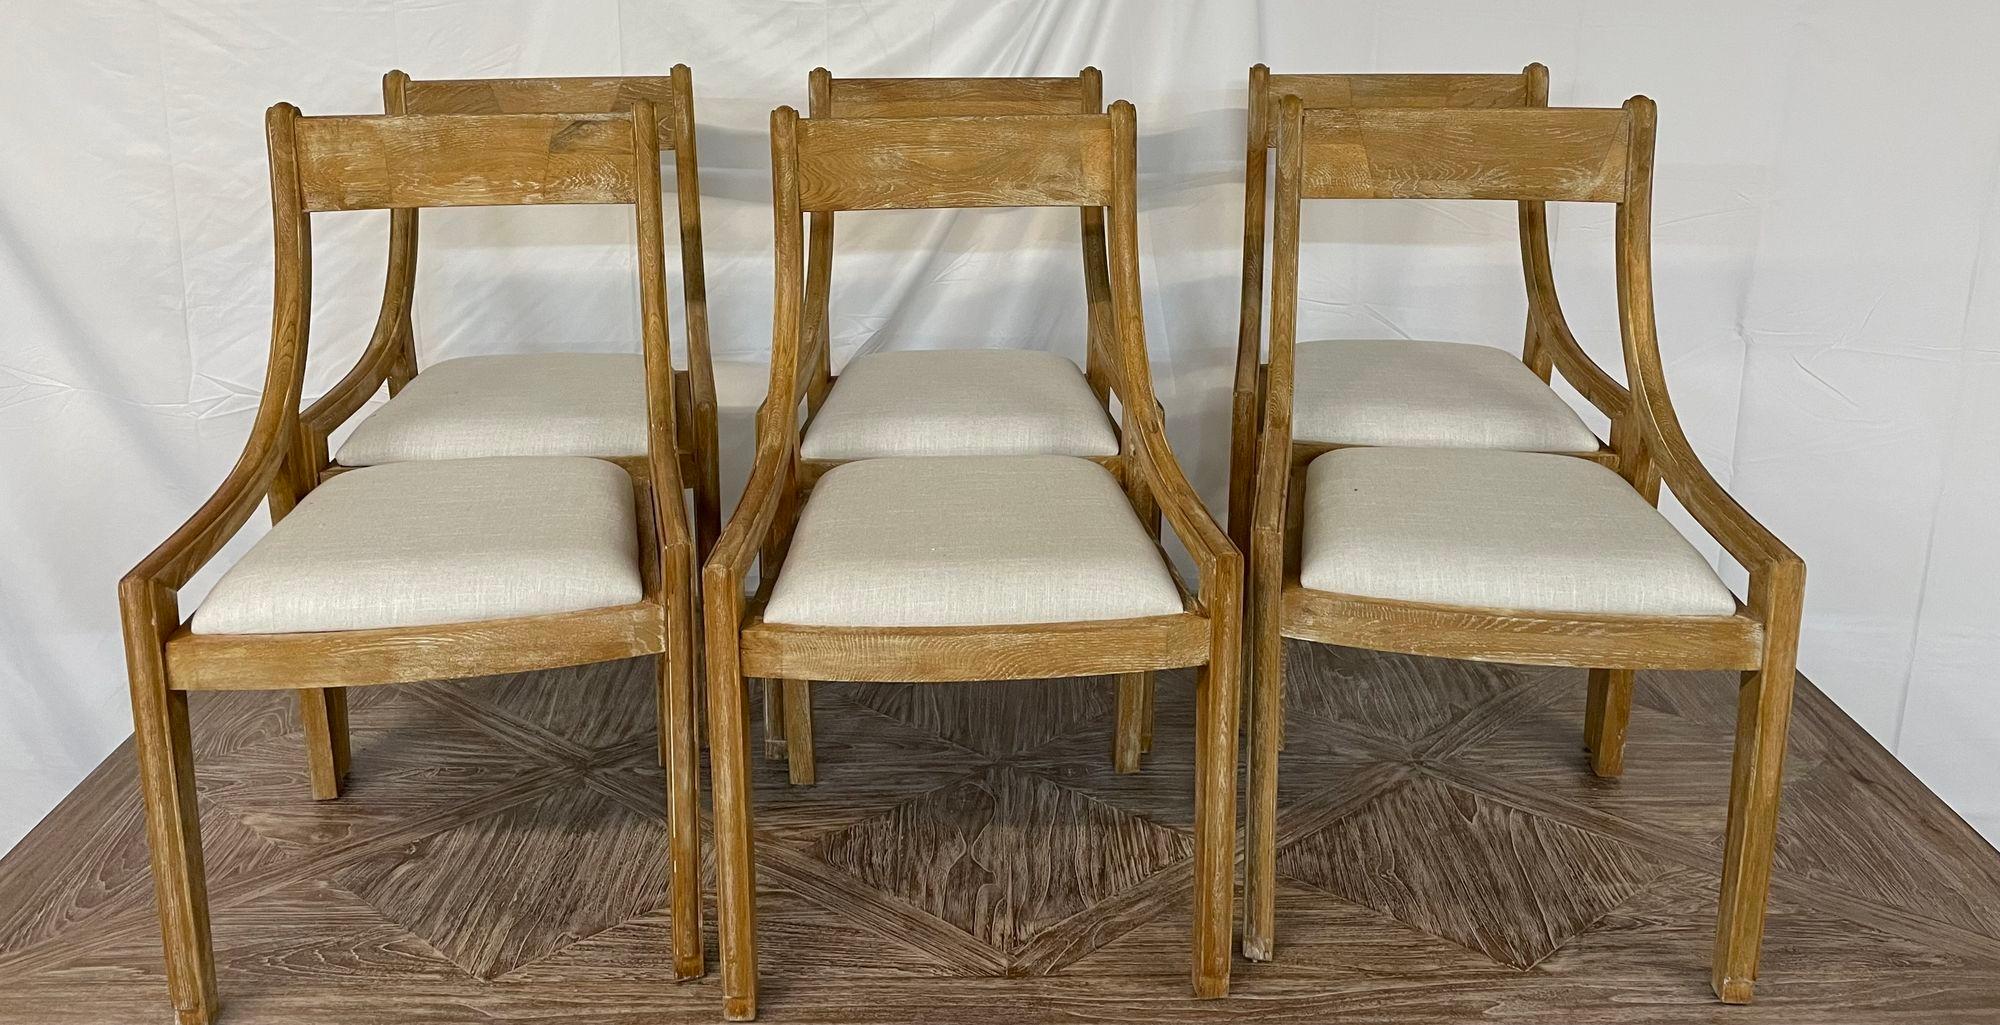 Set of 6 Farmhouse Modern Sleigh back dining / side chairs, pickled wood, linen.
 
Six mid-century inspired French country dining or side chairs having been hand made and produced in the Philippines in 2015. The chairs feature a pickled wood